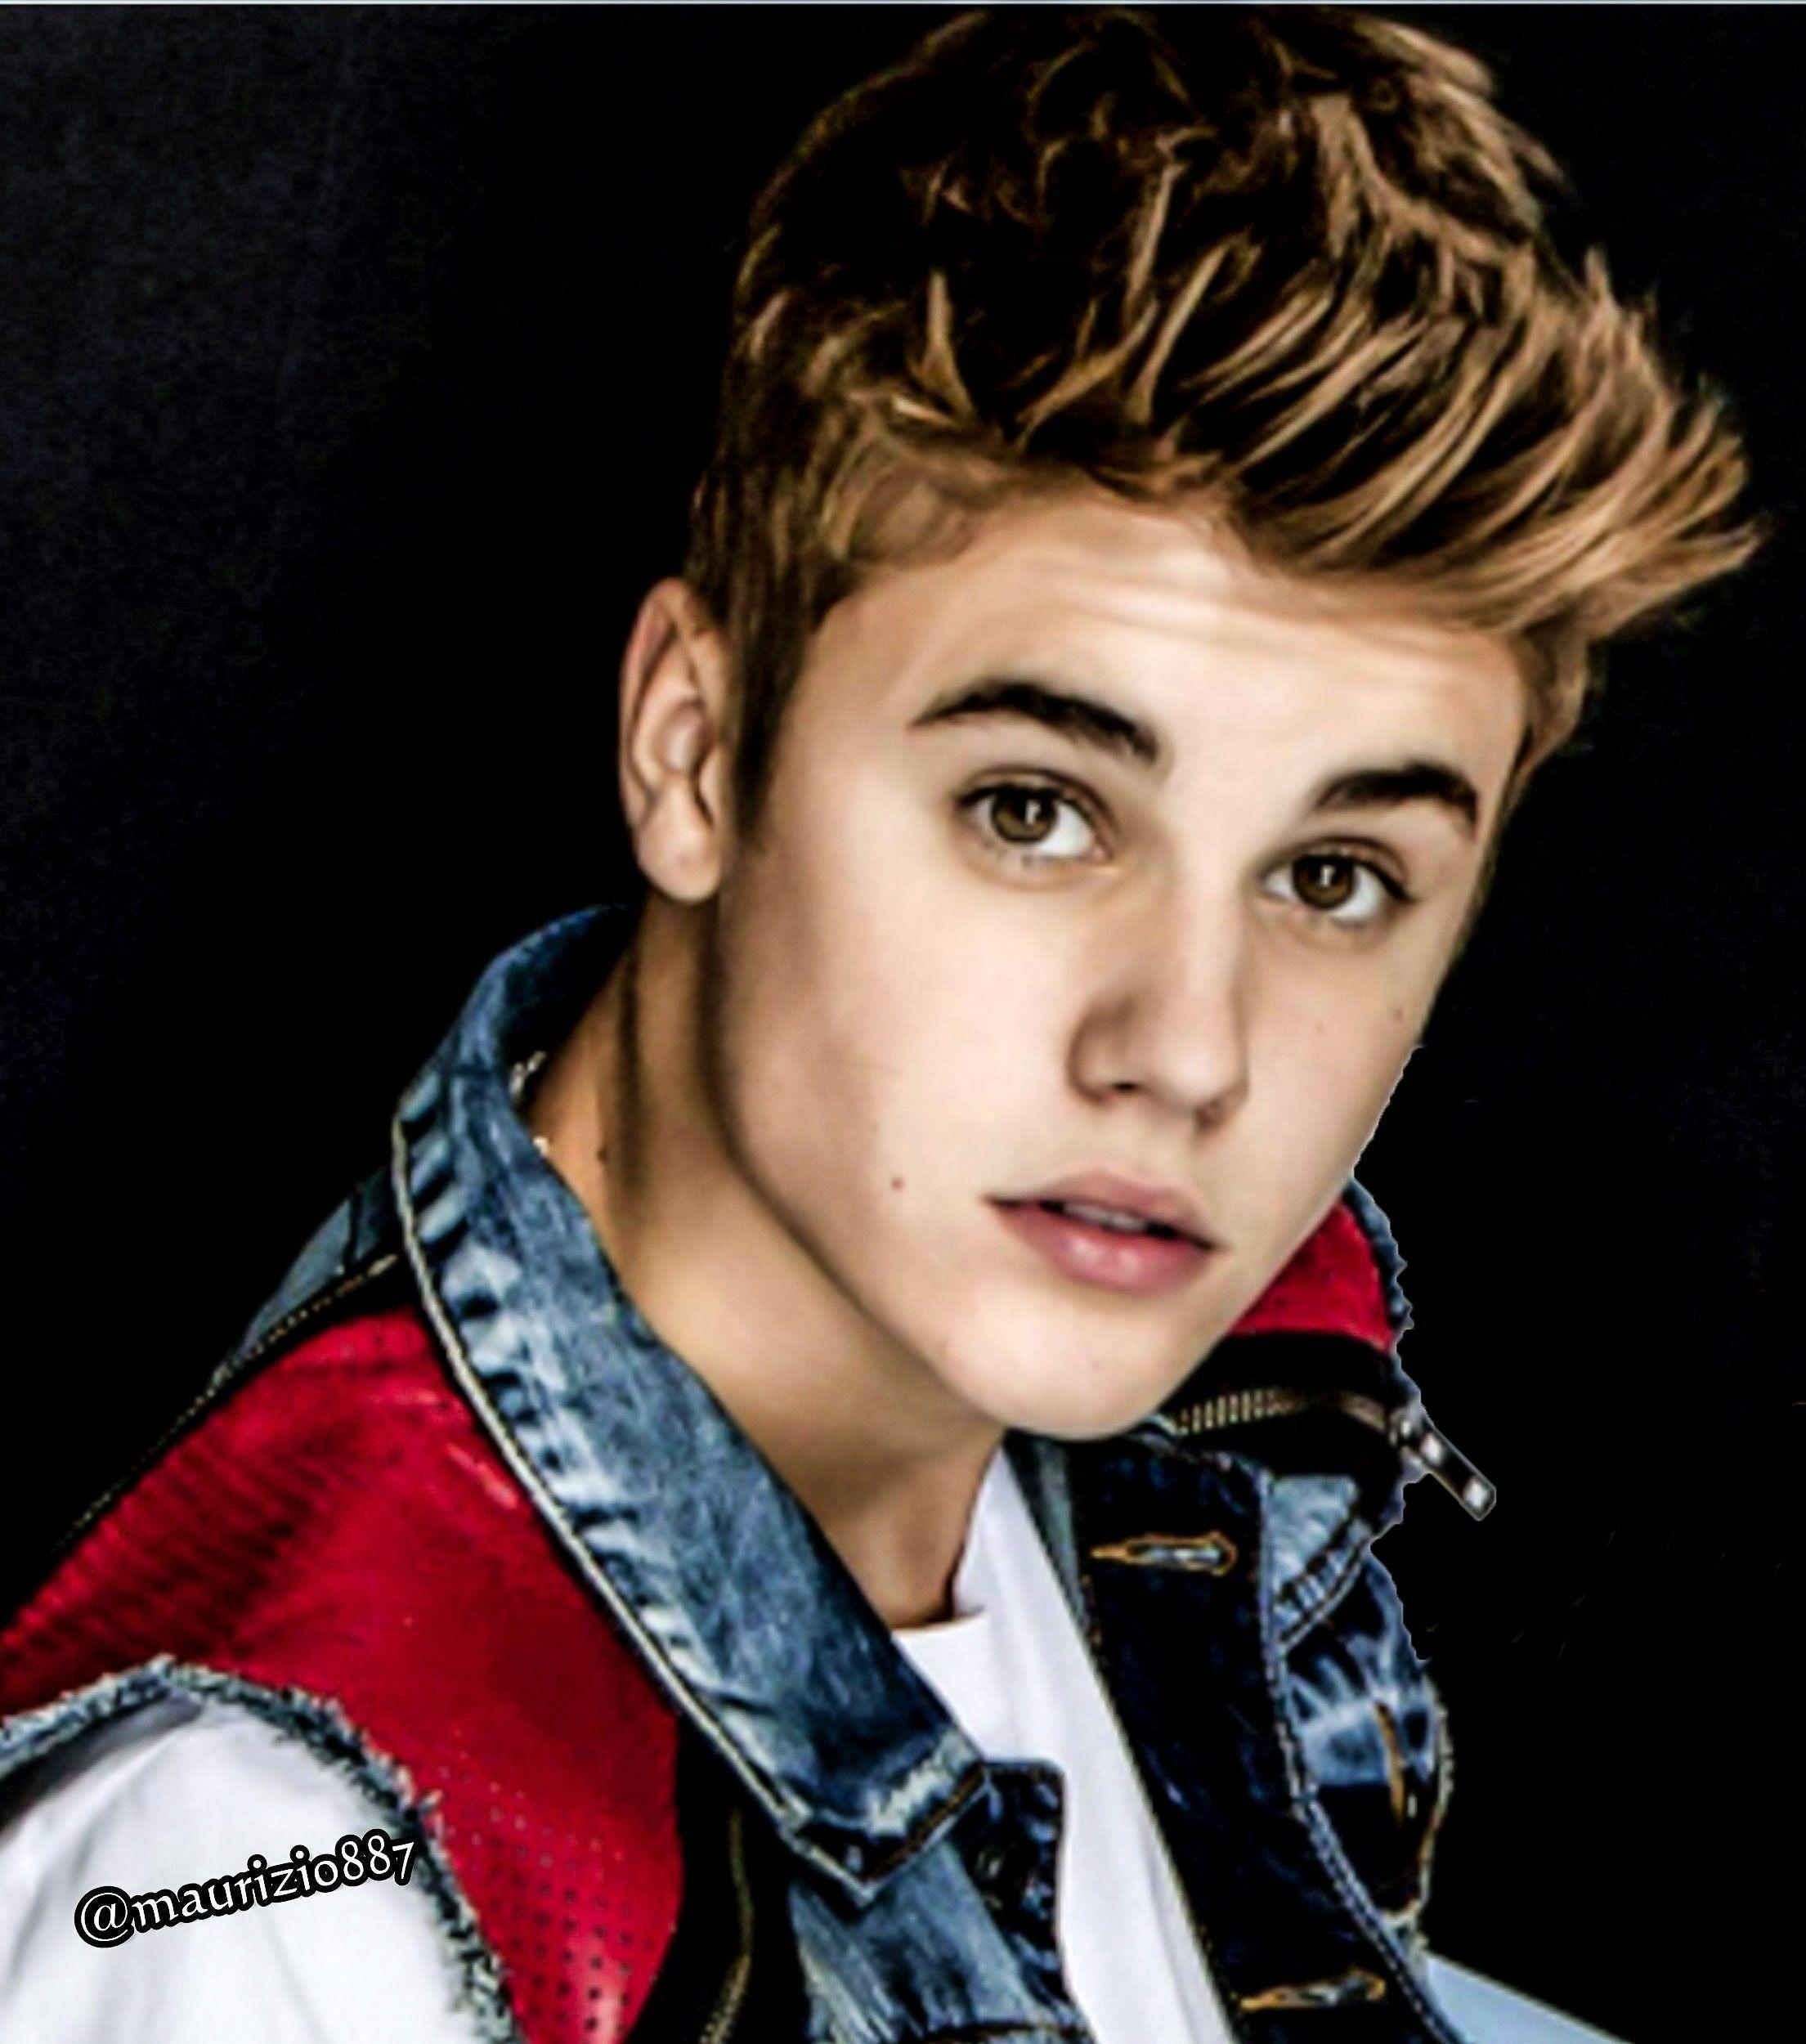 10 Most Popular Justin Bieber Images 2015 FULL HD 1920×1080 For PC Background